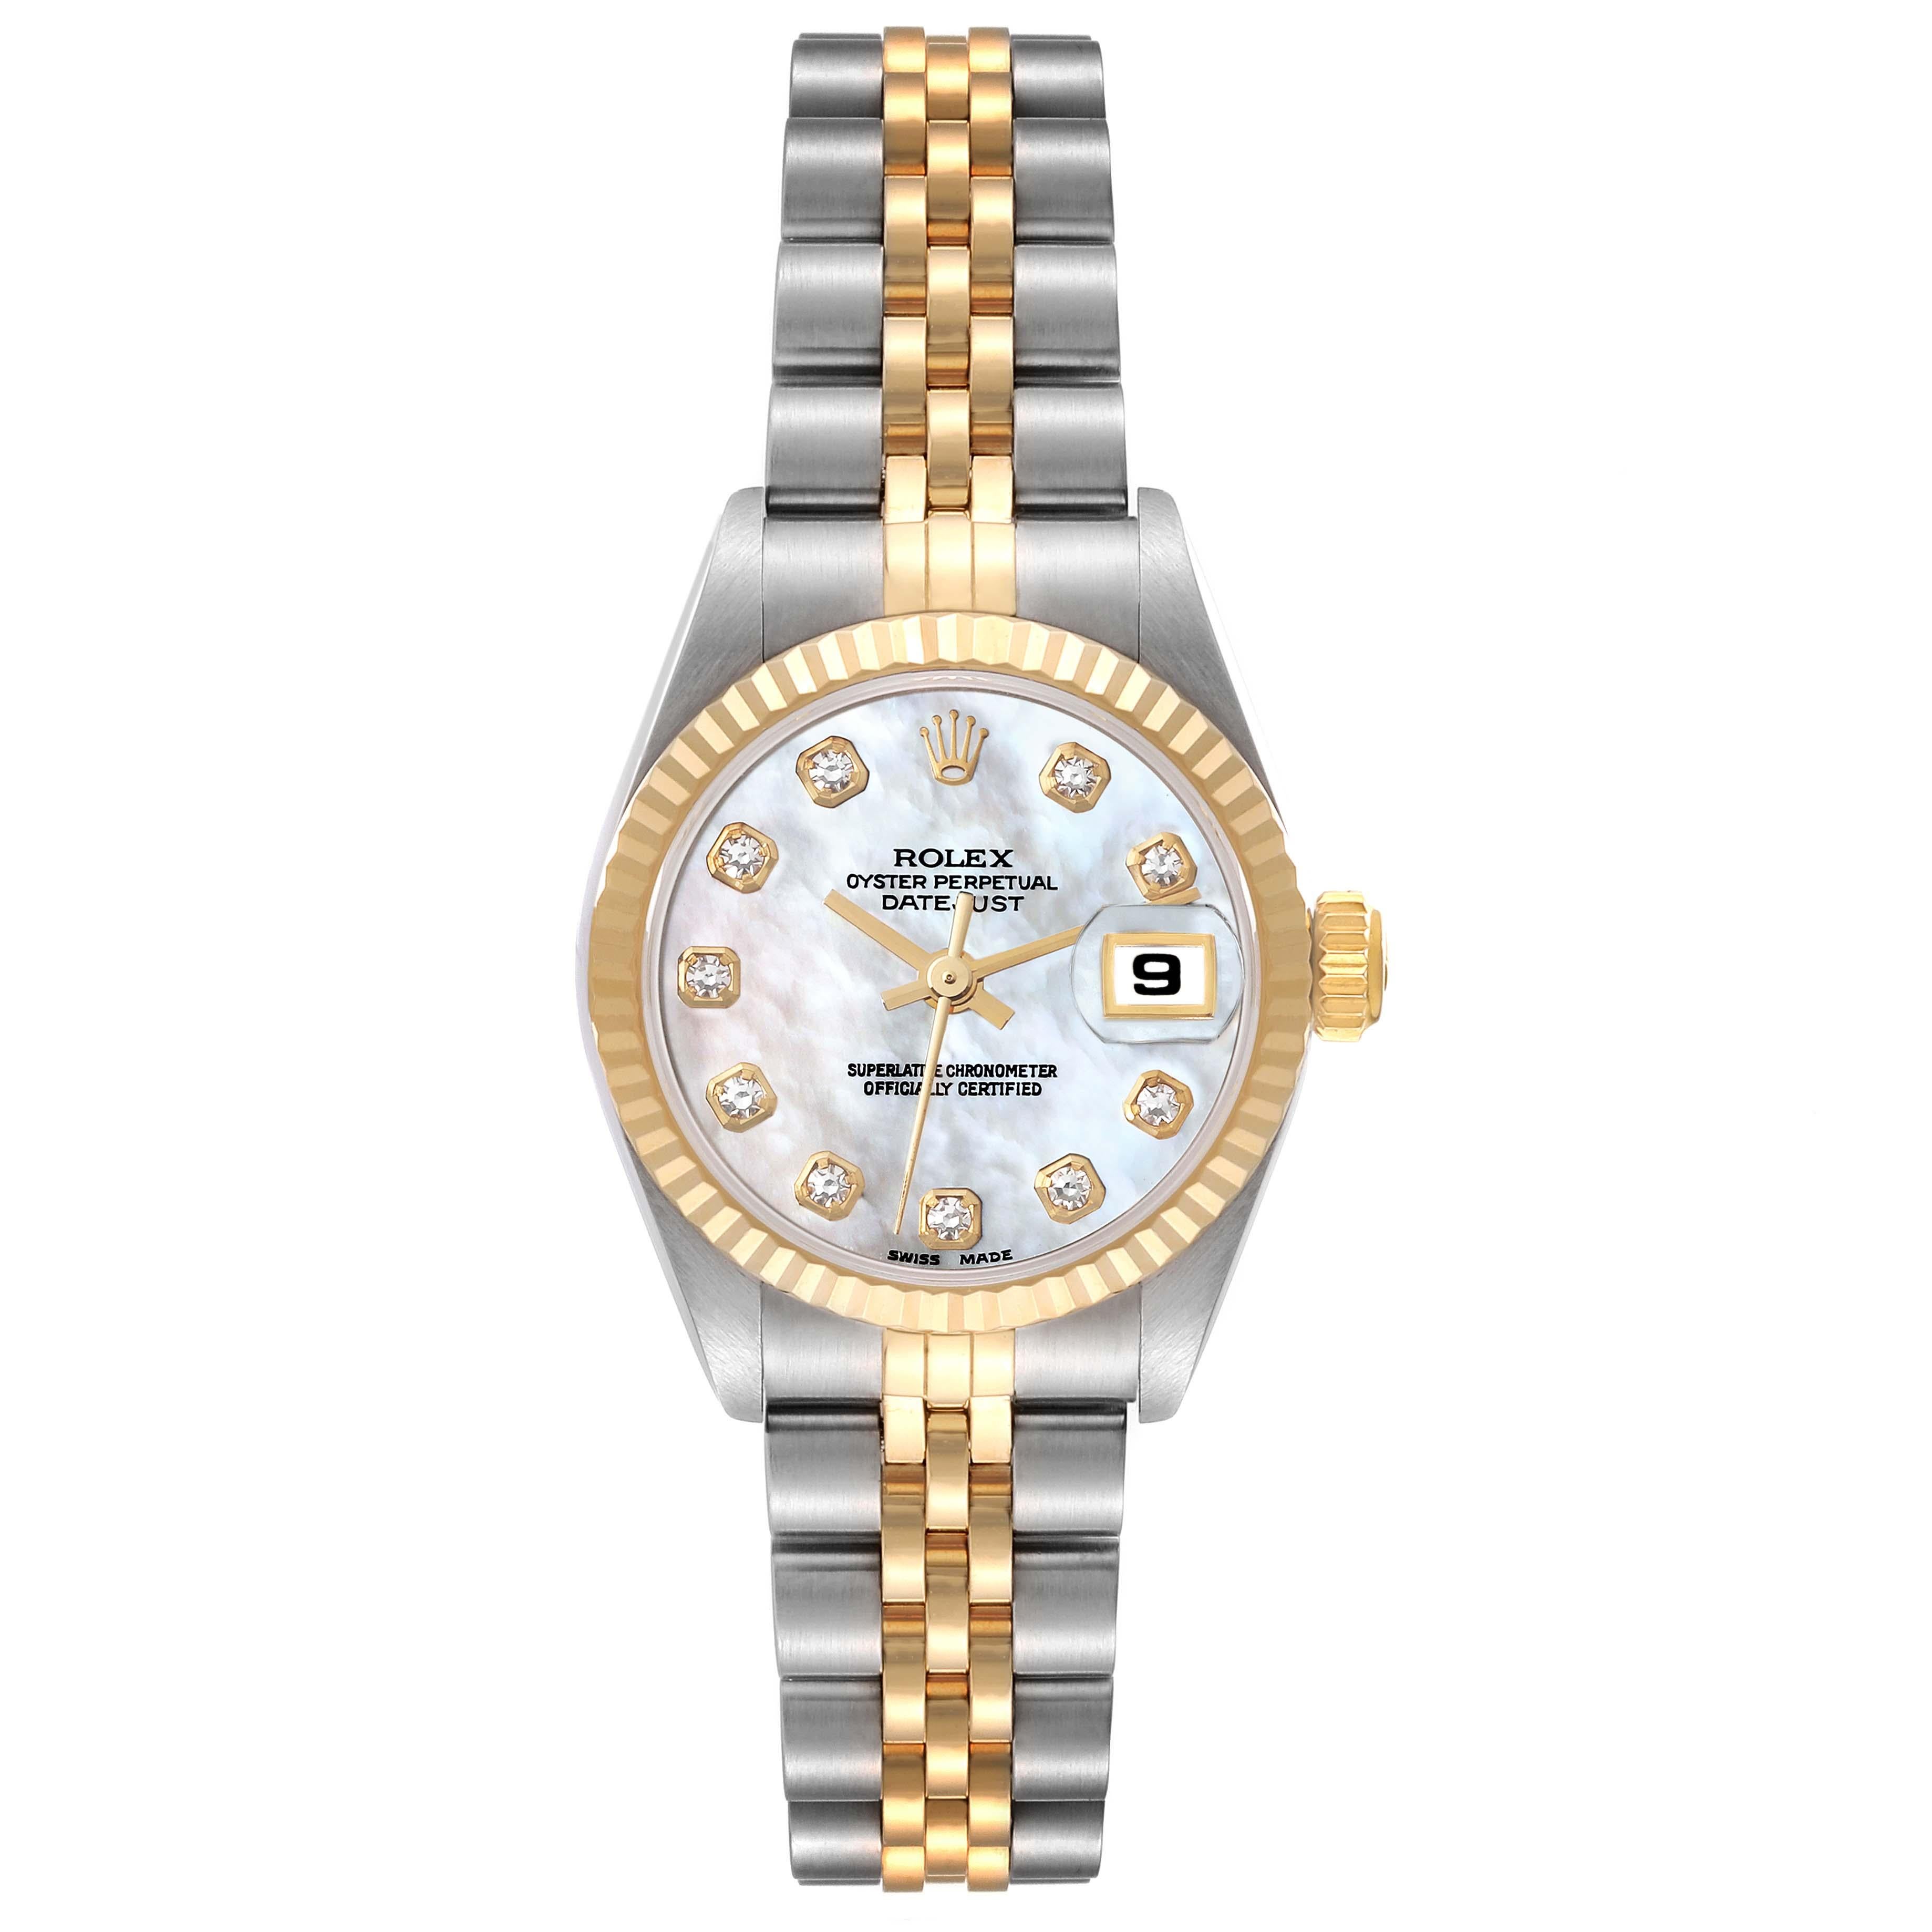 Rolex Datejust Steel Yellow Gold Mother Of Pearl Diamond Dial Ladies Watch 69173. Officially certified chronometer automatic self-winding movement. Stainless steel oyster case 26.0 mm in diameter. Rolex logo on the crown. 18k yellow gold fluted